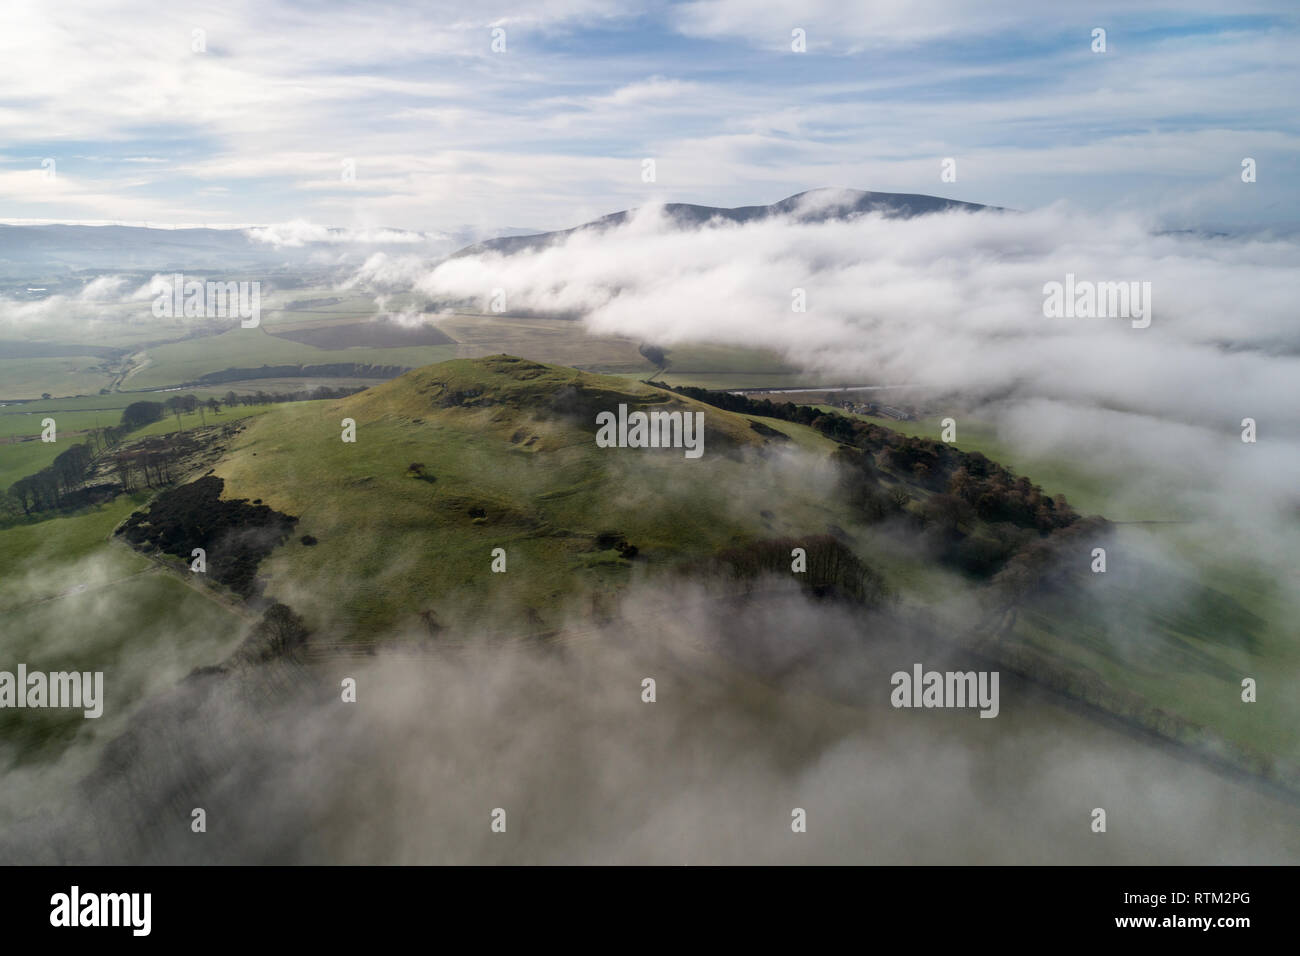 A cloud inversion over the Upper Clyde Valley in South Lanarkshire clearing to reveal Tinto Hill and Quathquan Law protruding above the mist. Stock Photo